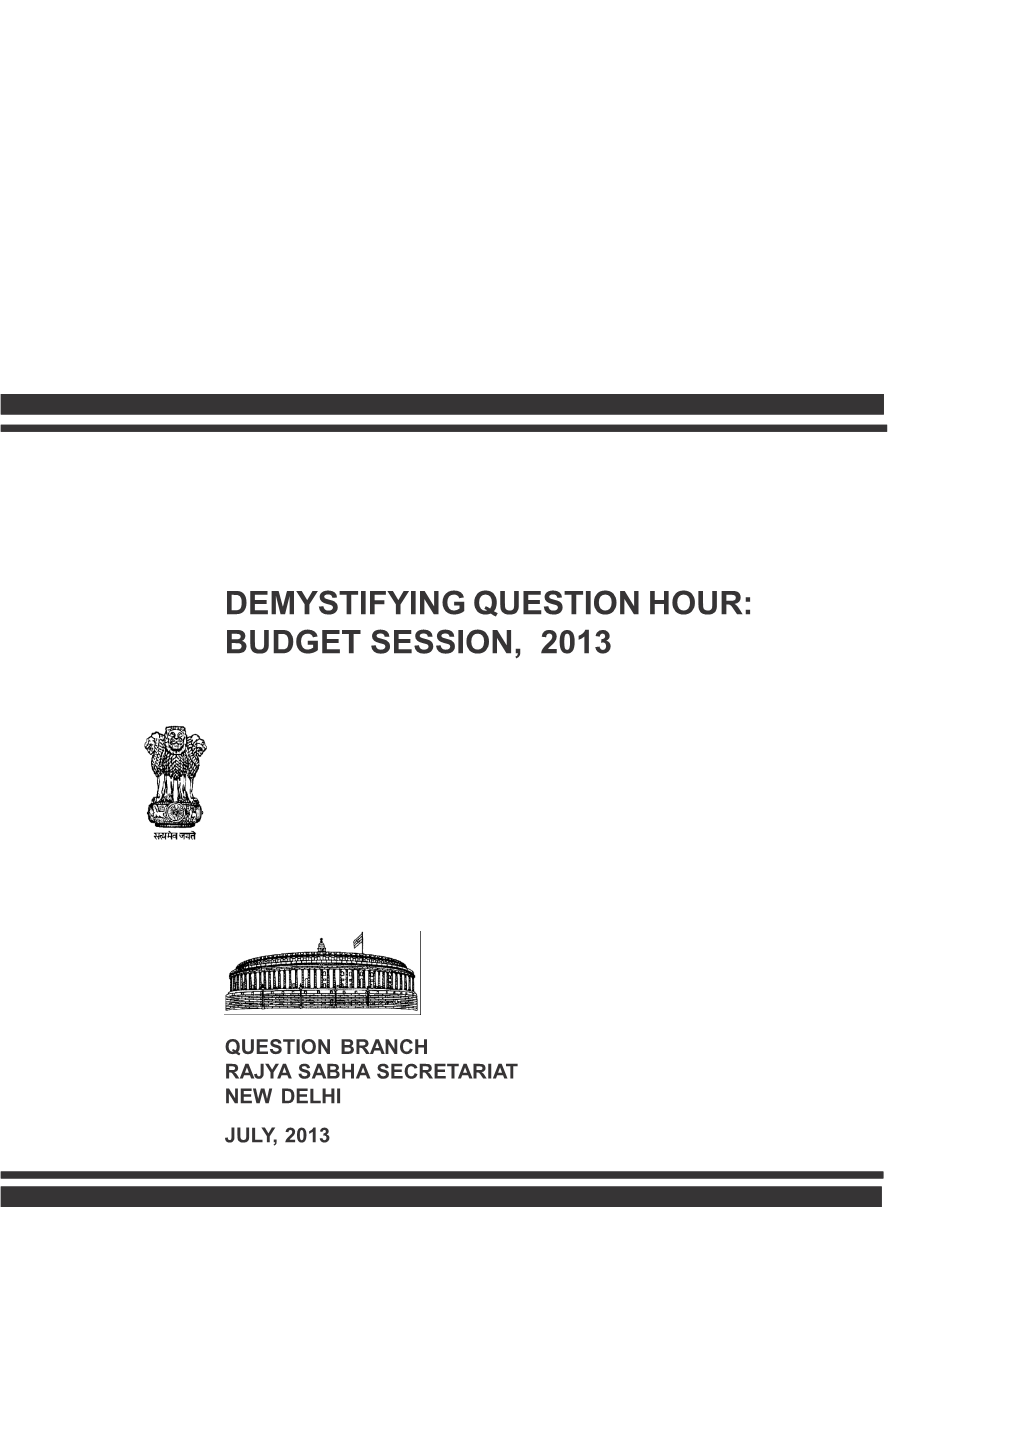 Demystifying Question Hour: Budget Session, 2013